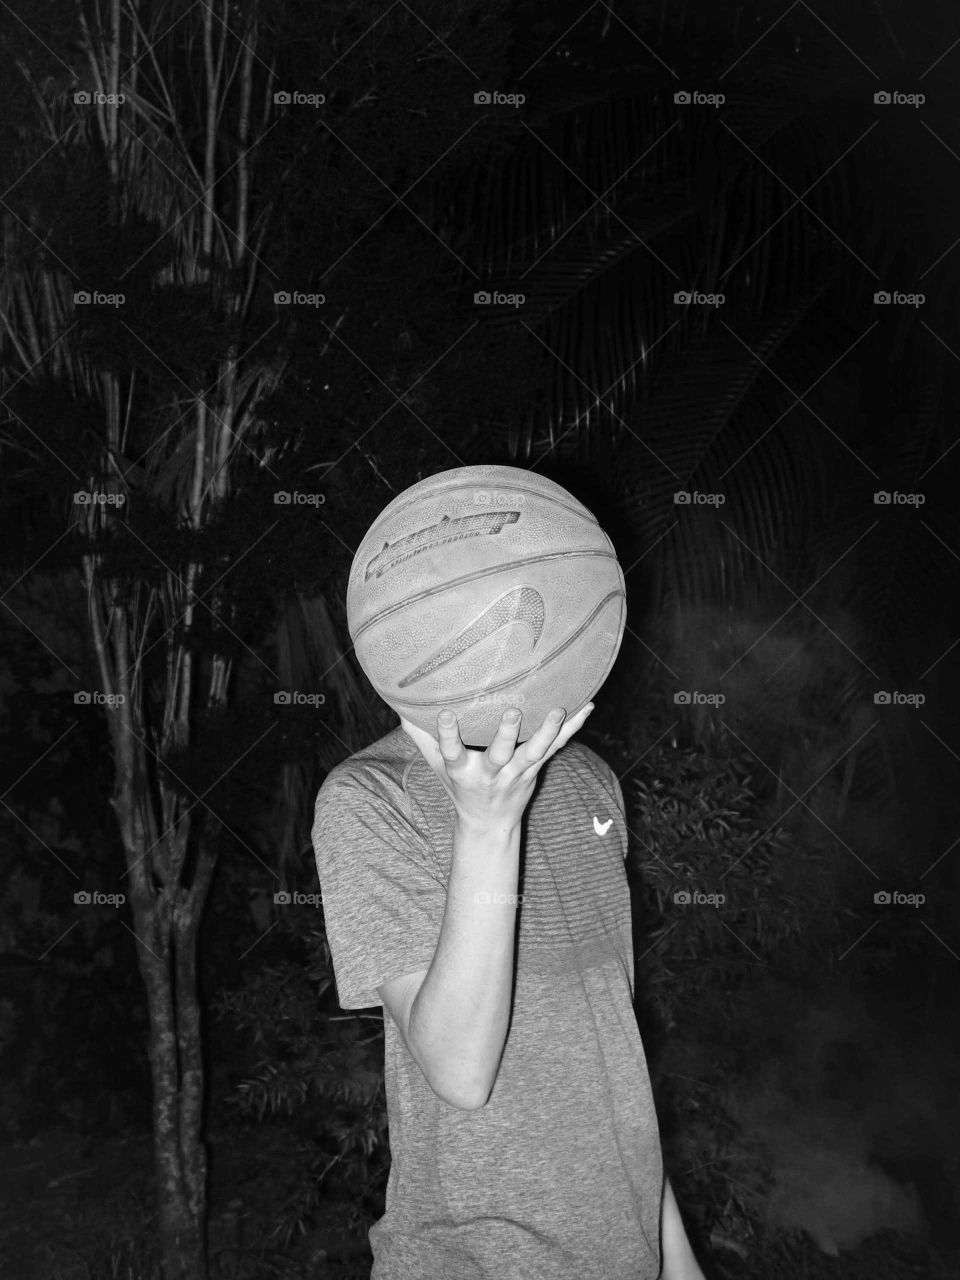 Man holding his basketball head, black and white trippy and surreal portrait.